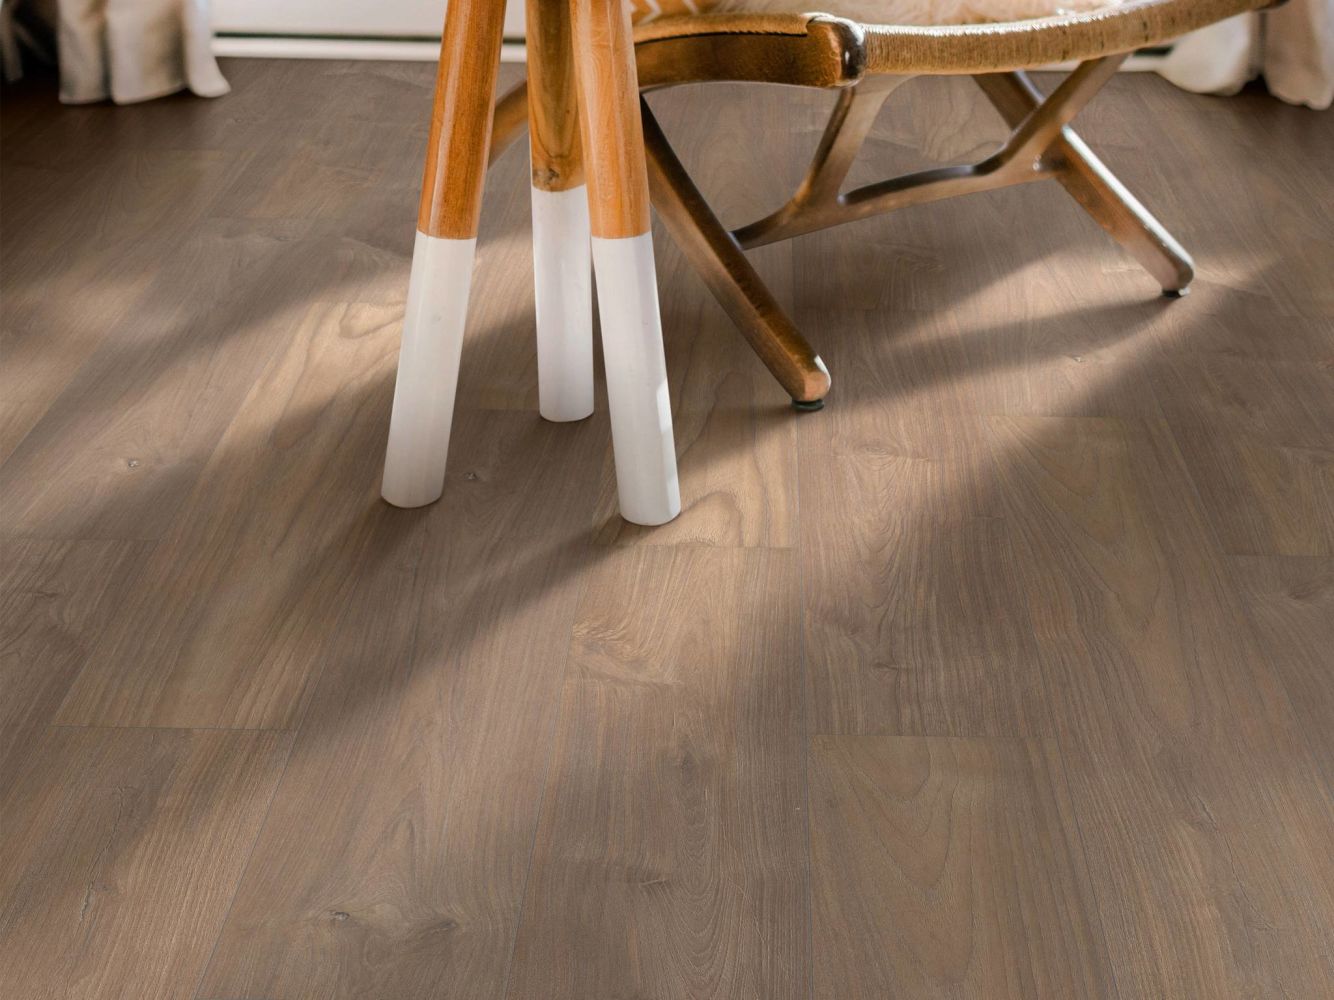 Shaw Floors Century Homes Chave Style Oiled Walnut 07724_C412H